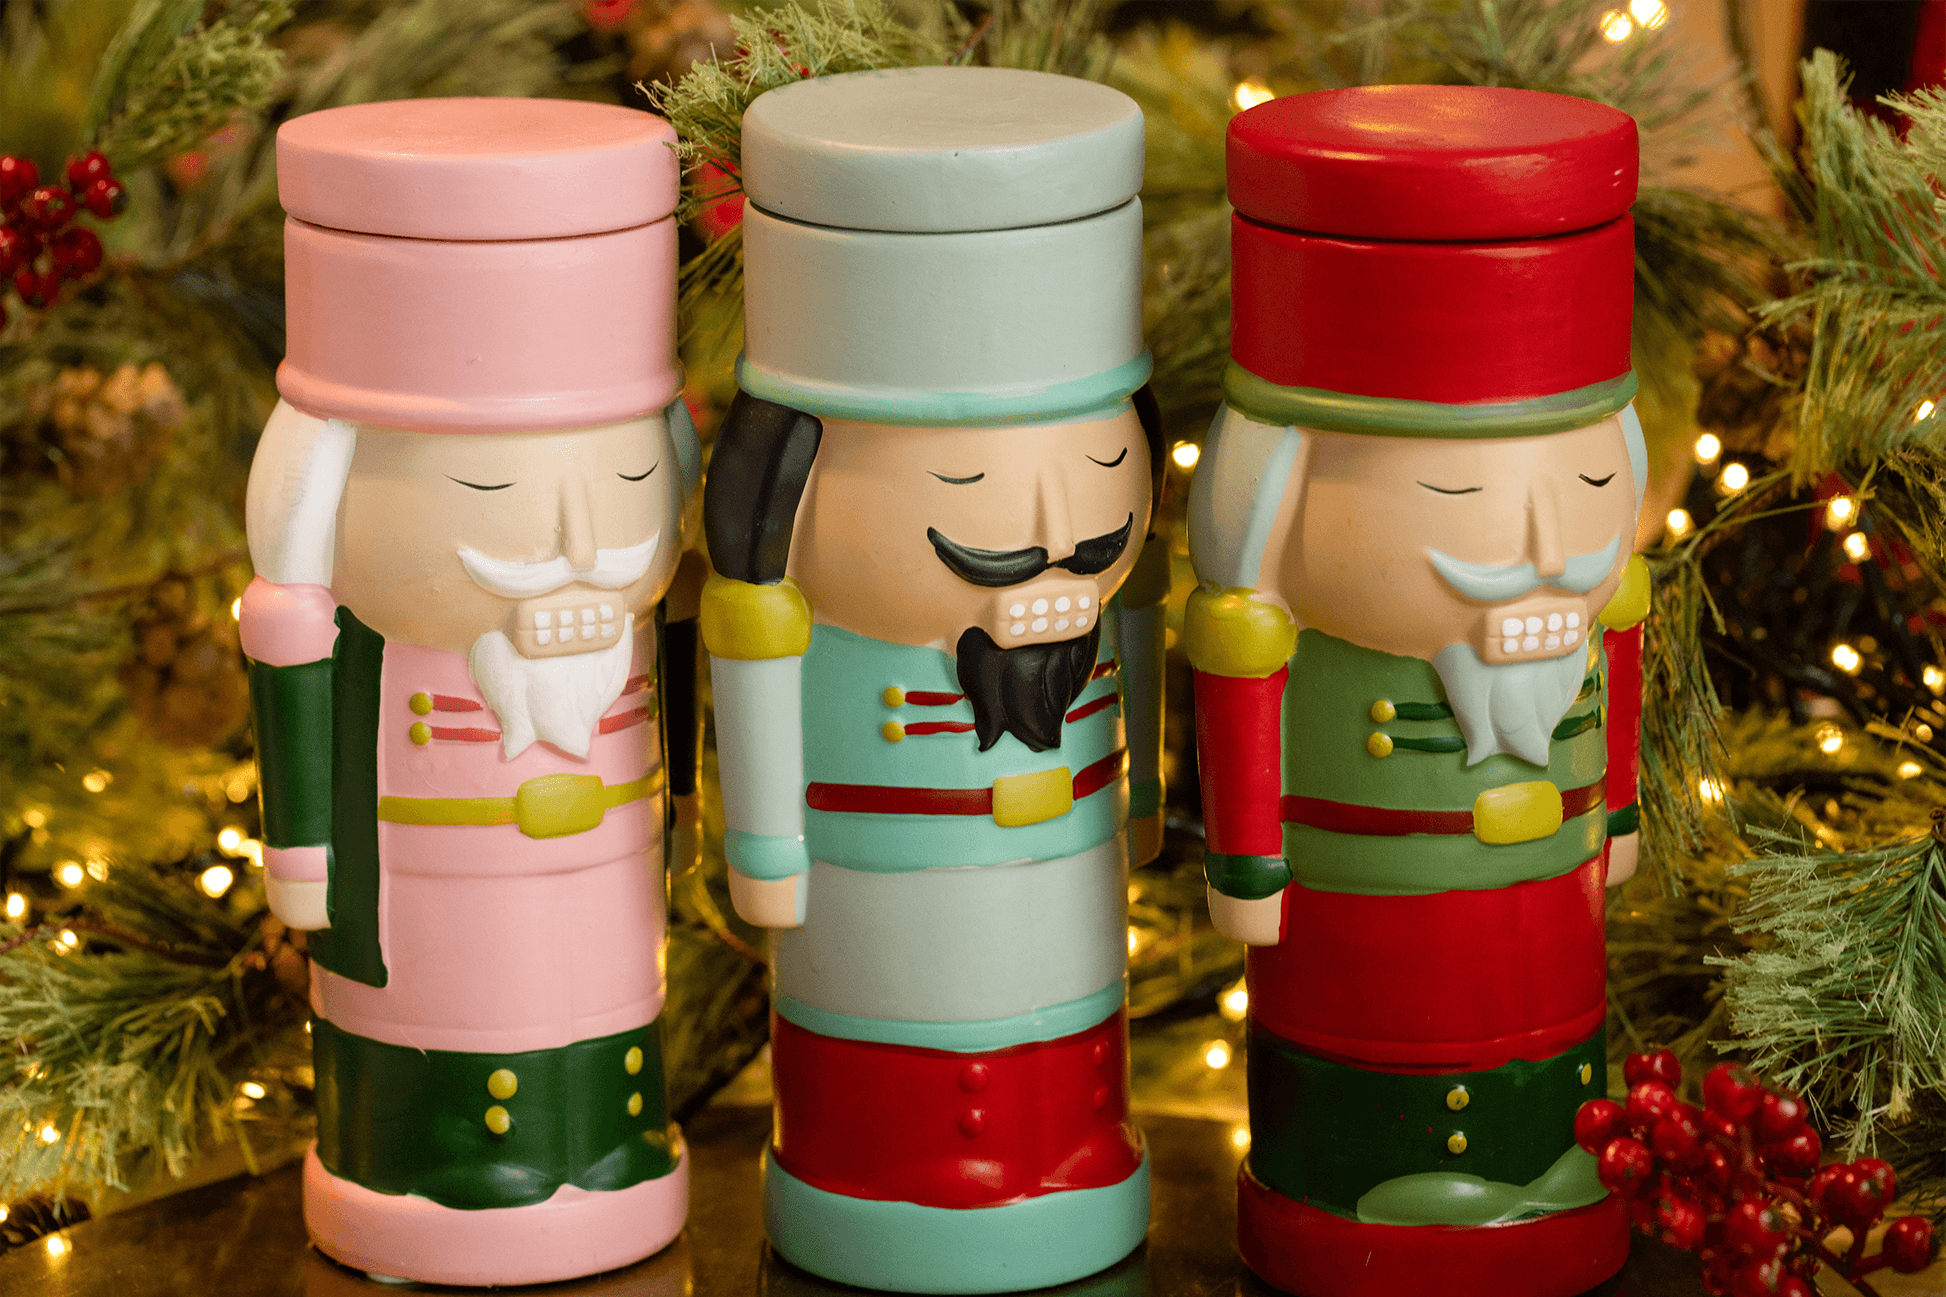 Nutcracker candles with lids on and Christmas decor